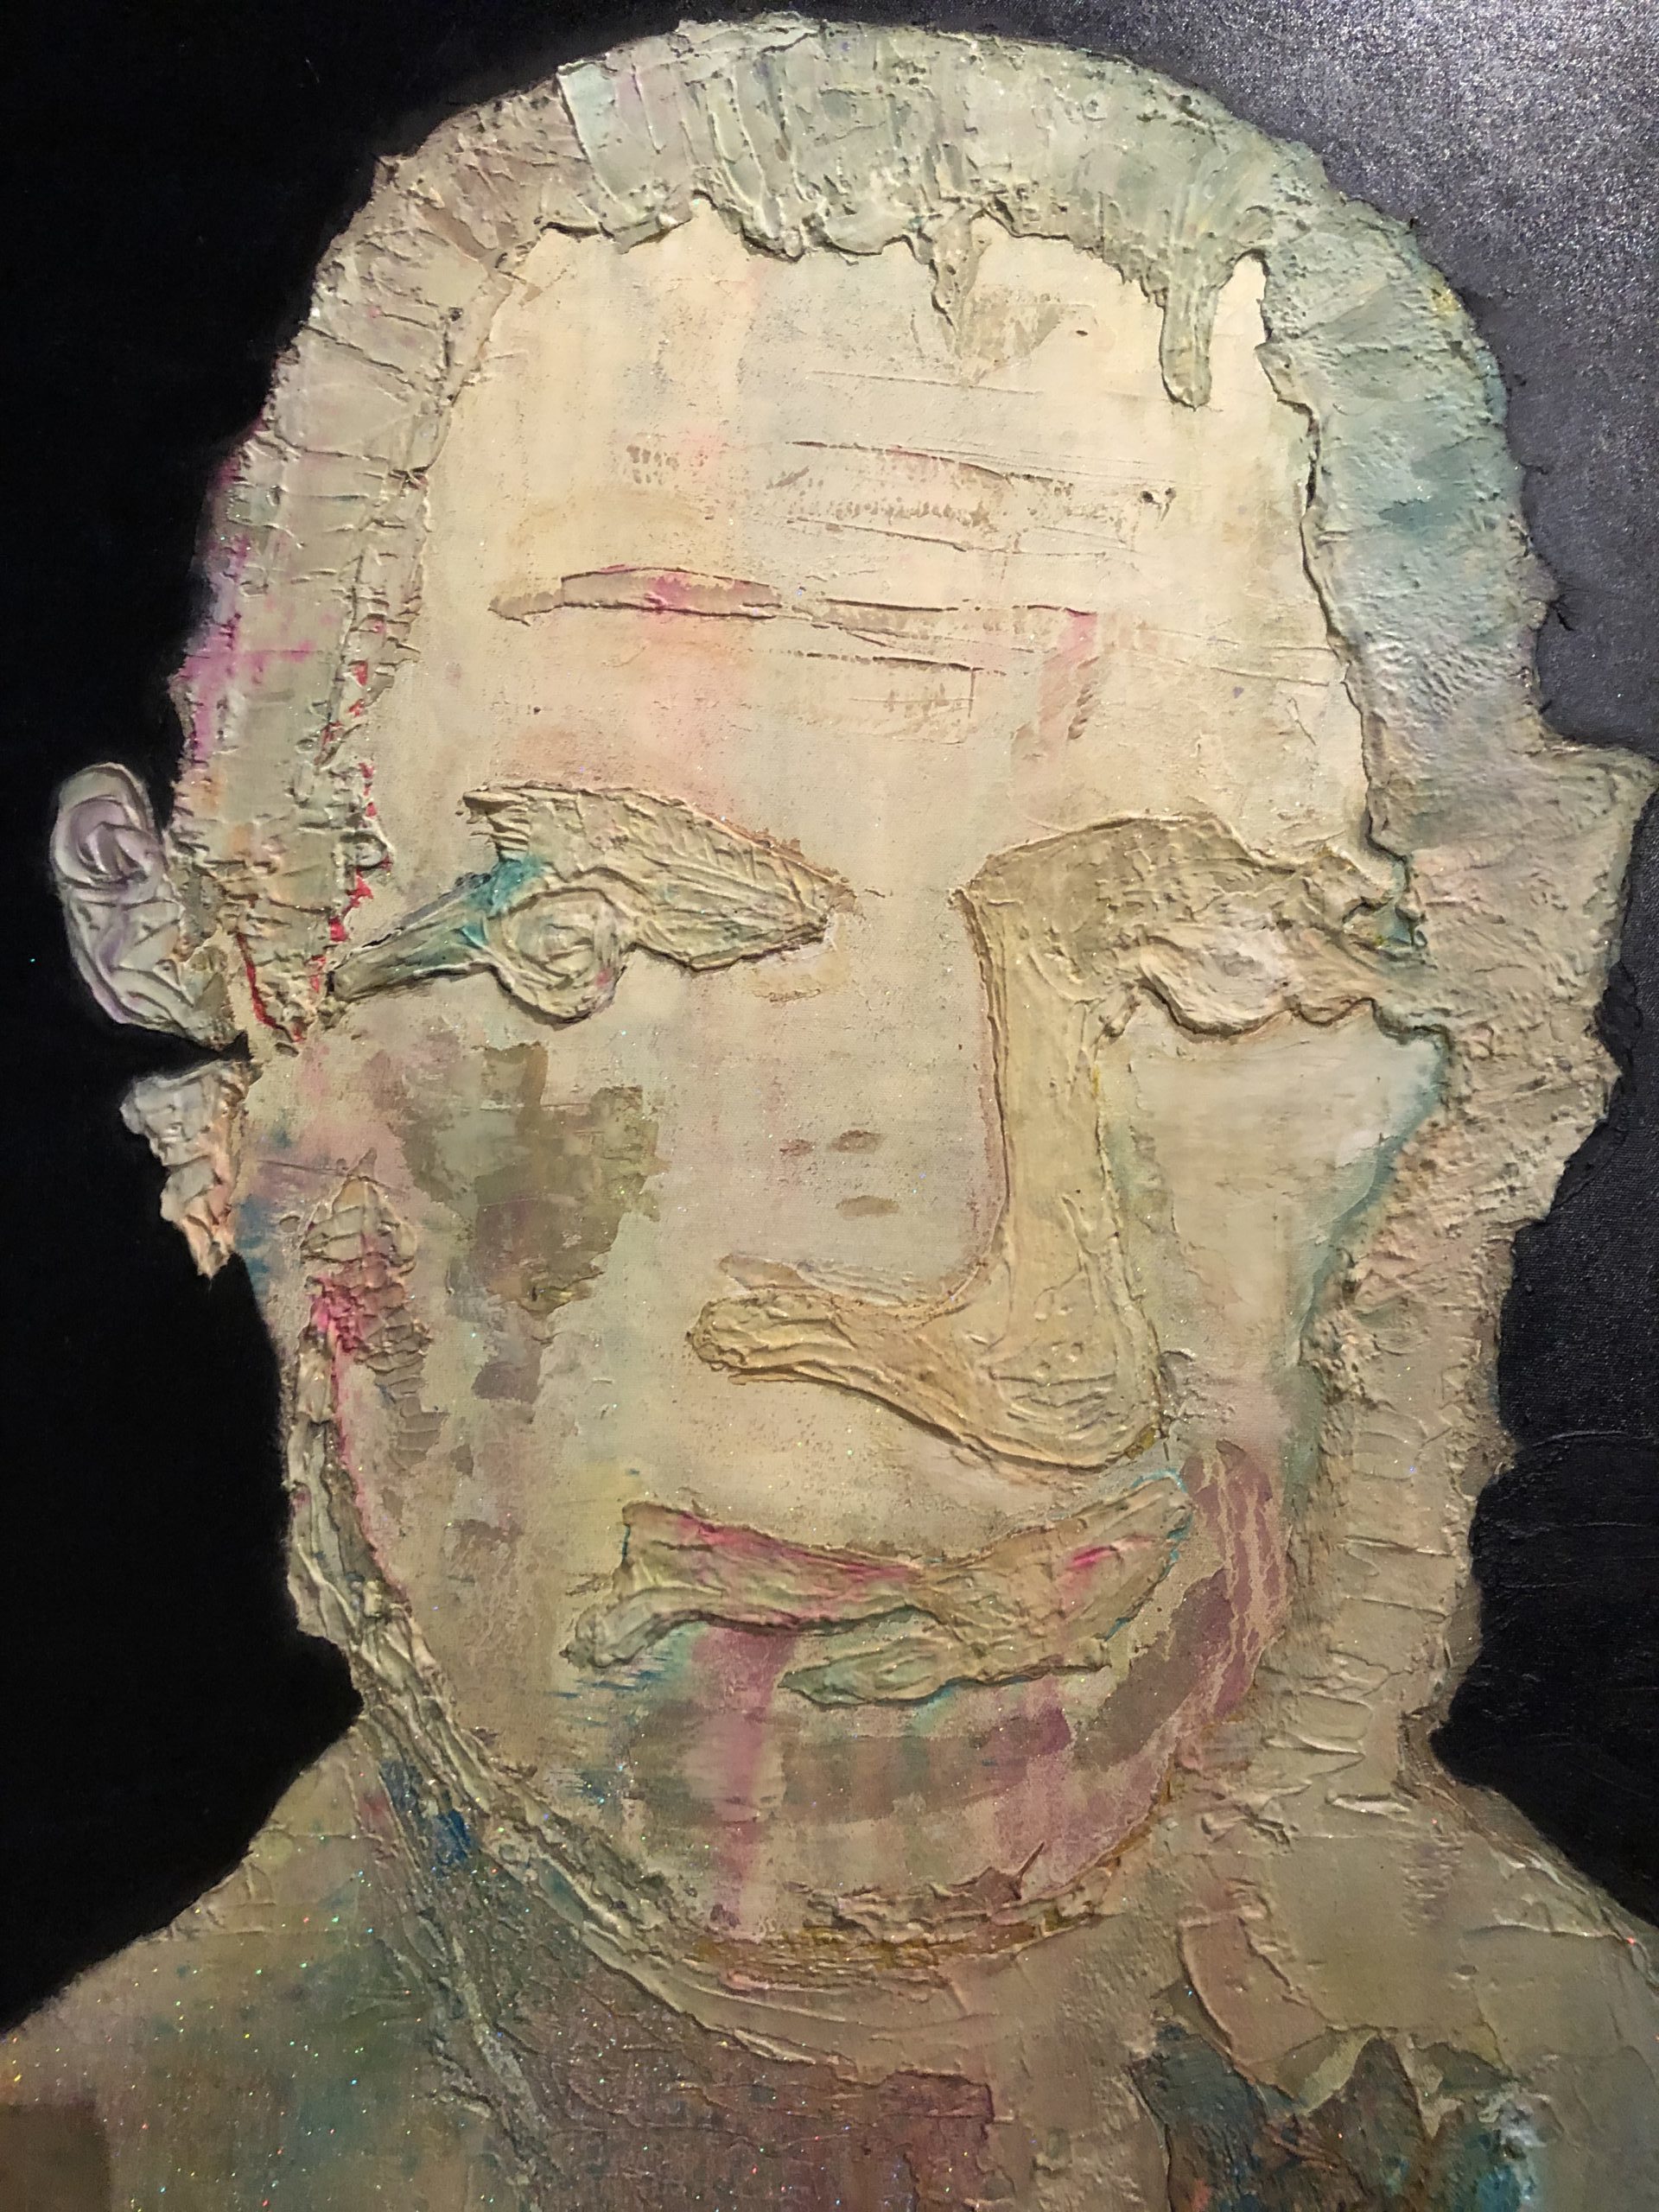 Samuel Courtauld painting and mixed media used to create his portrait.